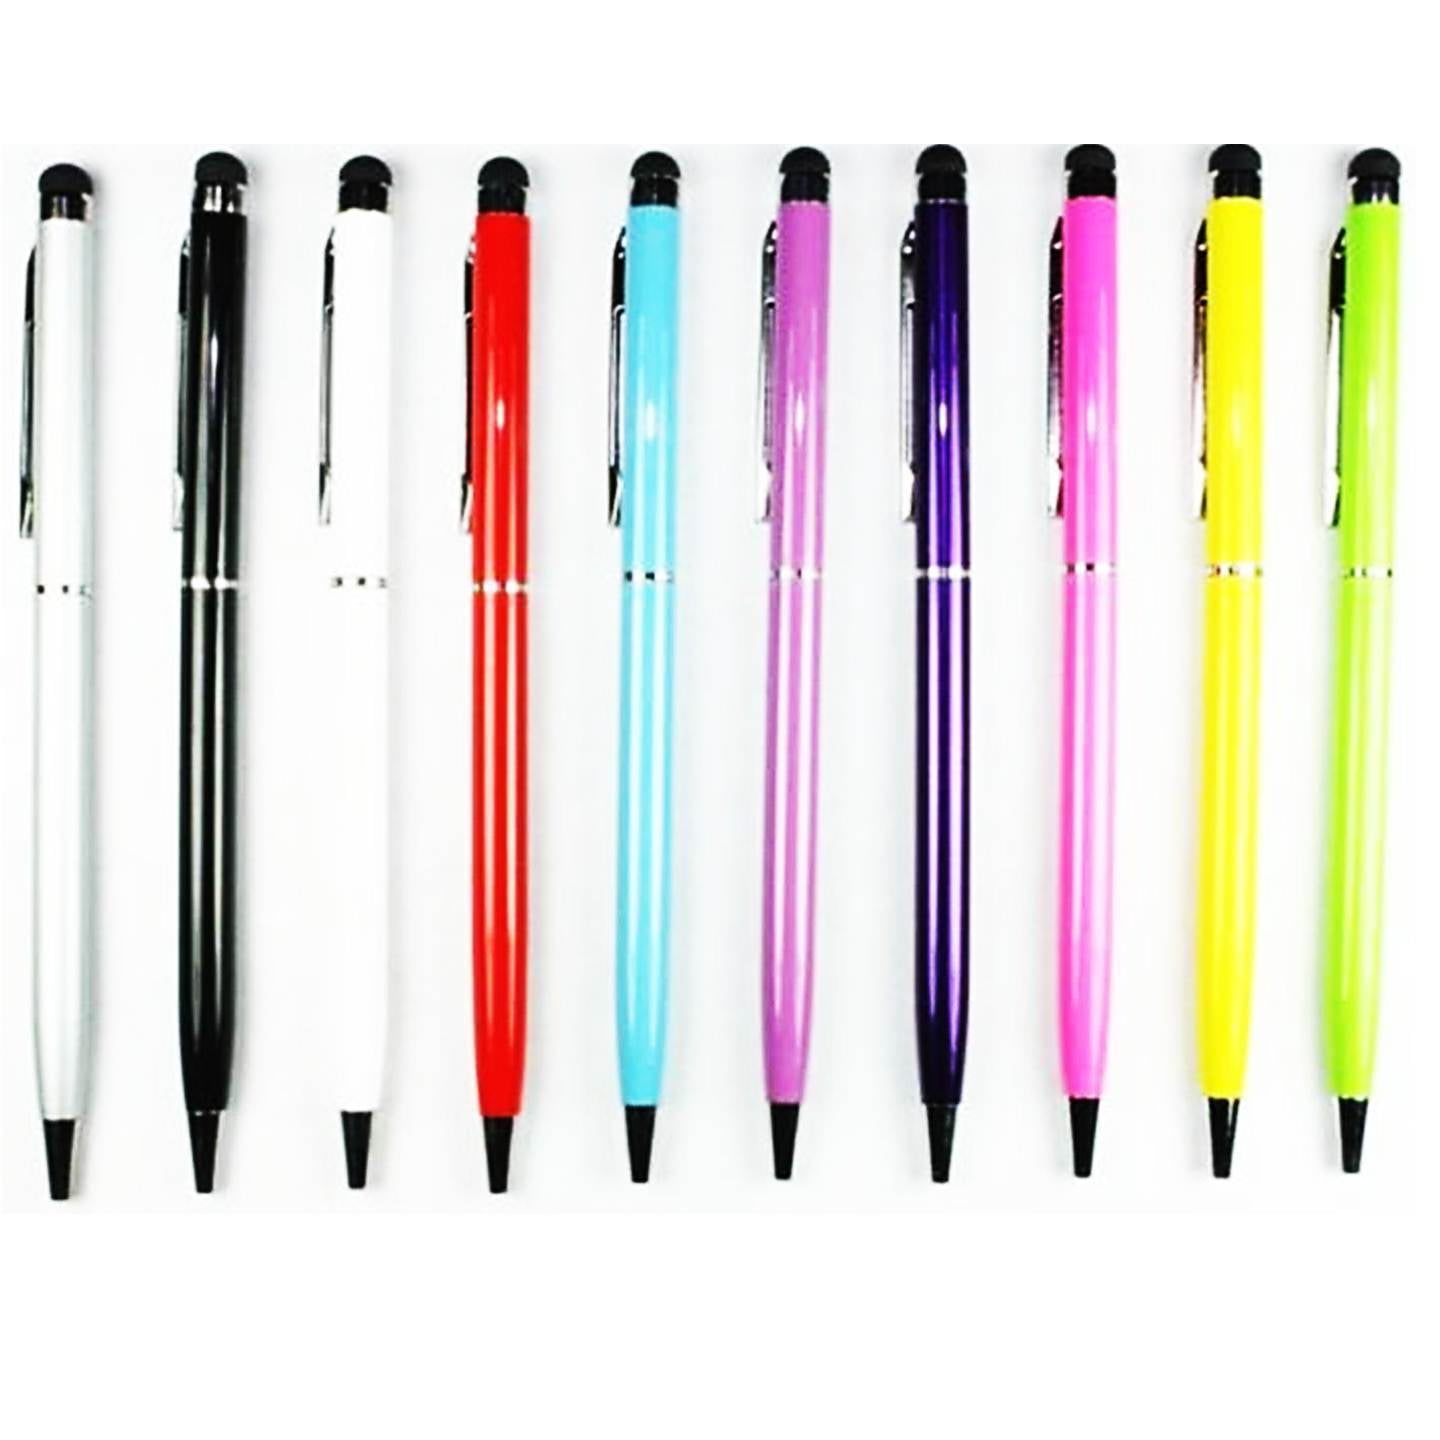 New 2 in1 Touch Screen Stylus Crystal Ballpoint Pen For iPhone Samsung iPad EPS 